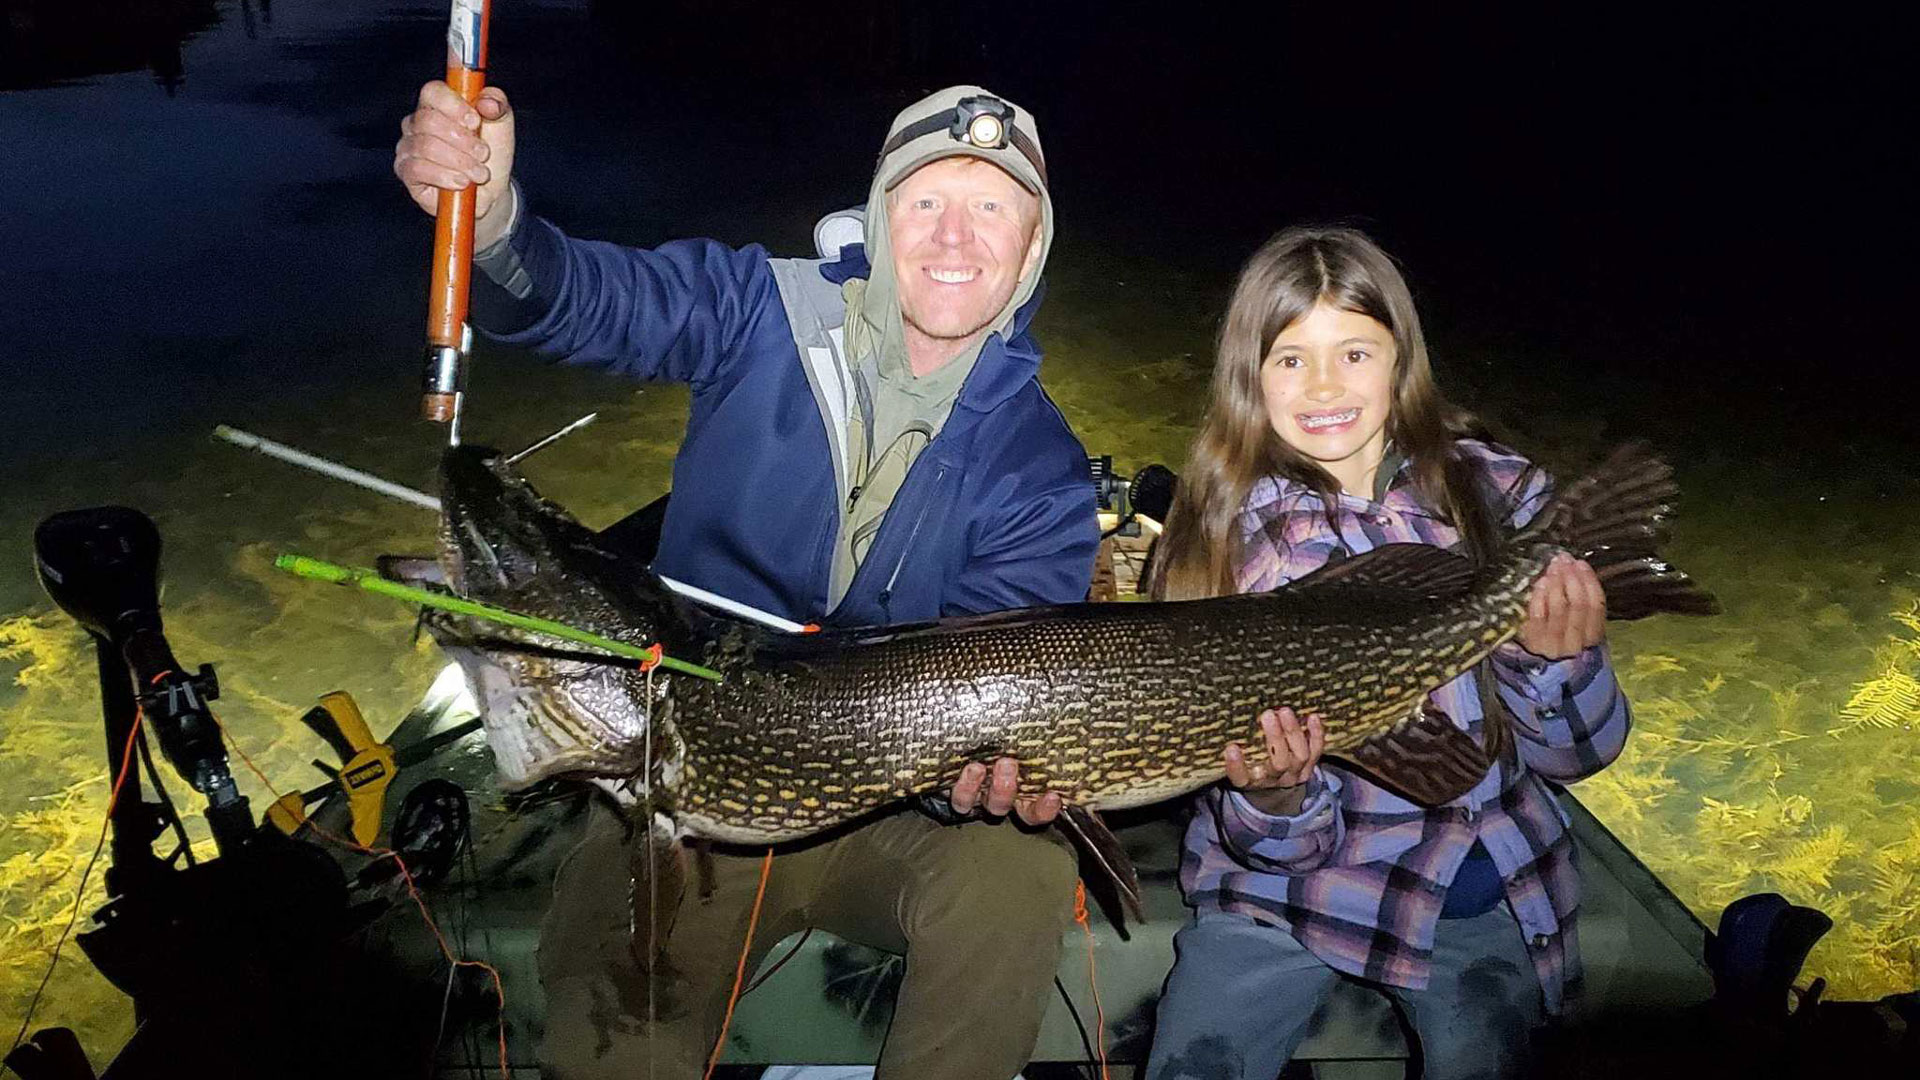 Lexi Dockstader with bow fishing world record pike fish. 